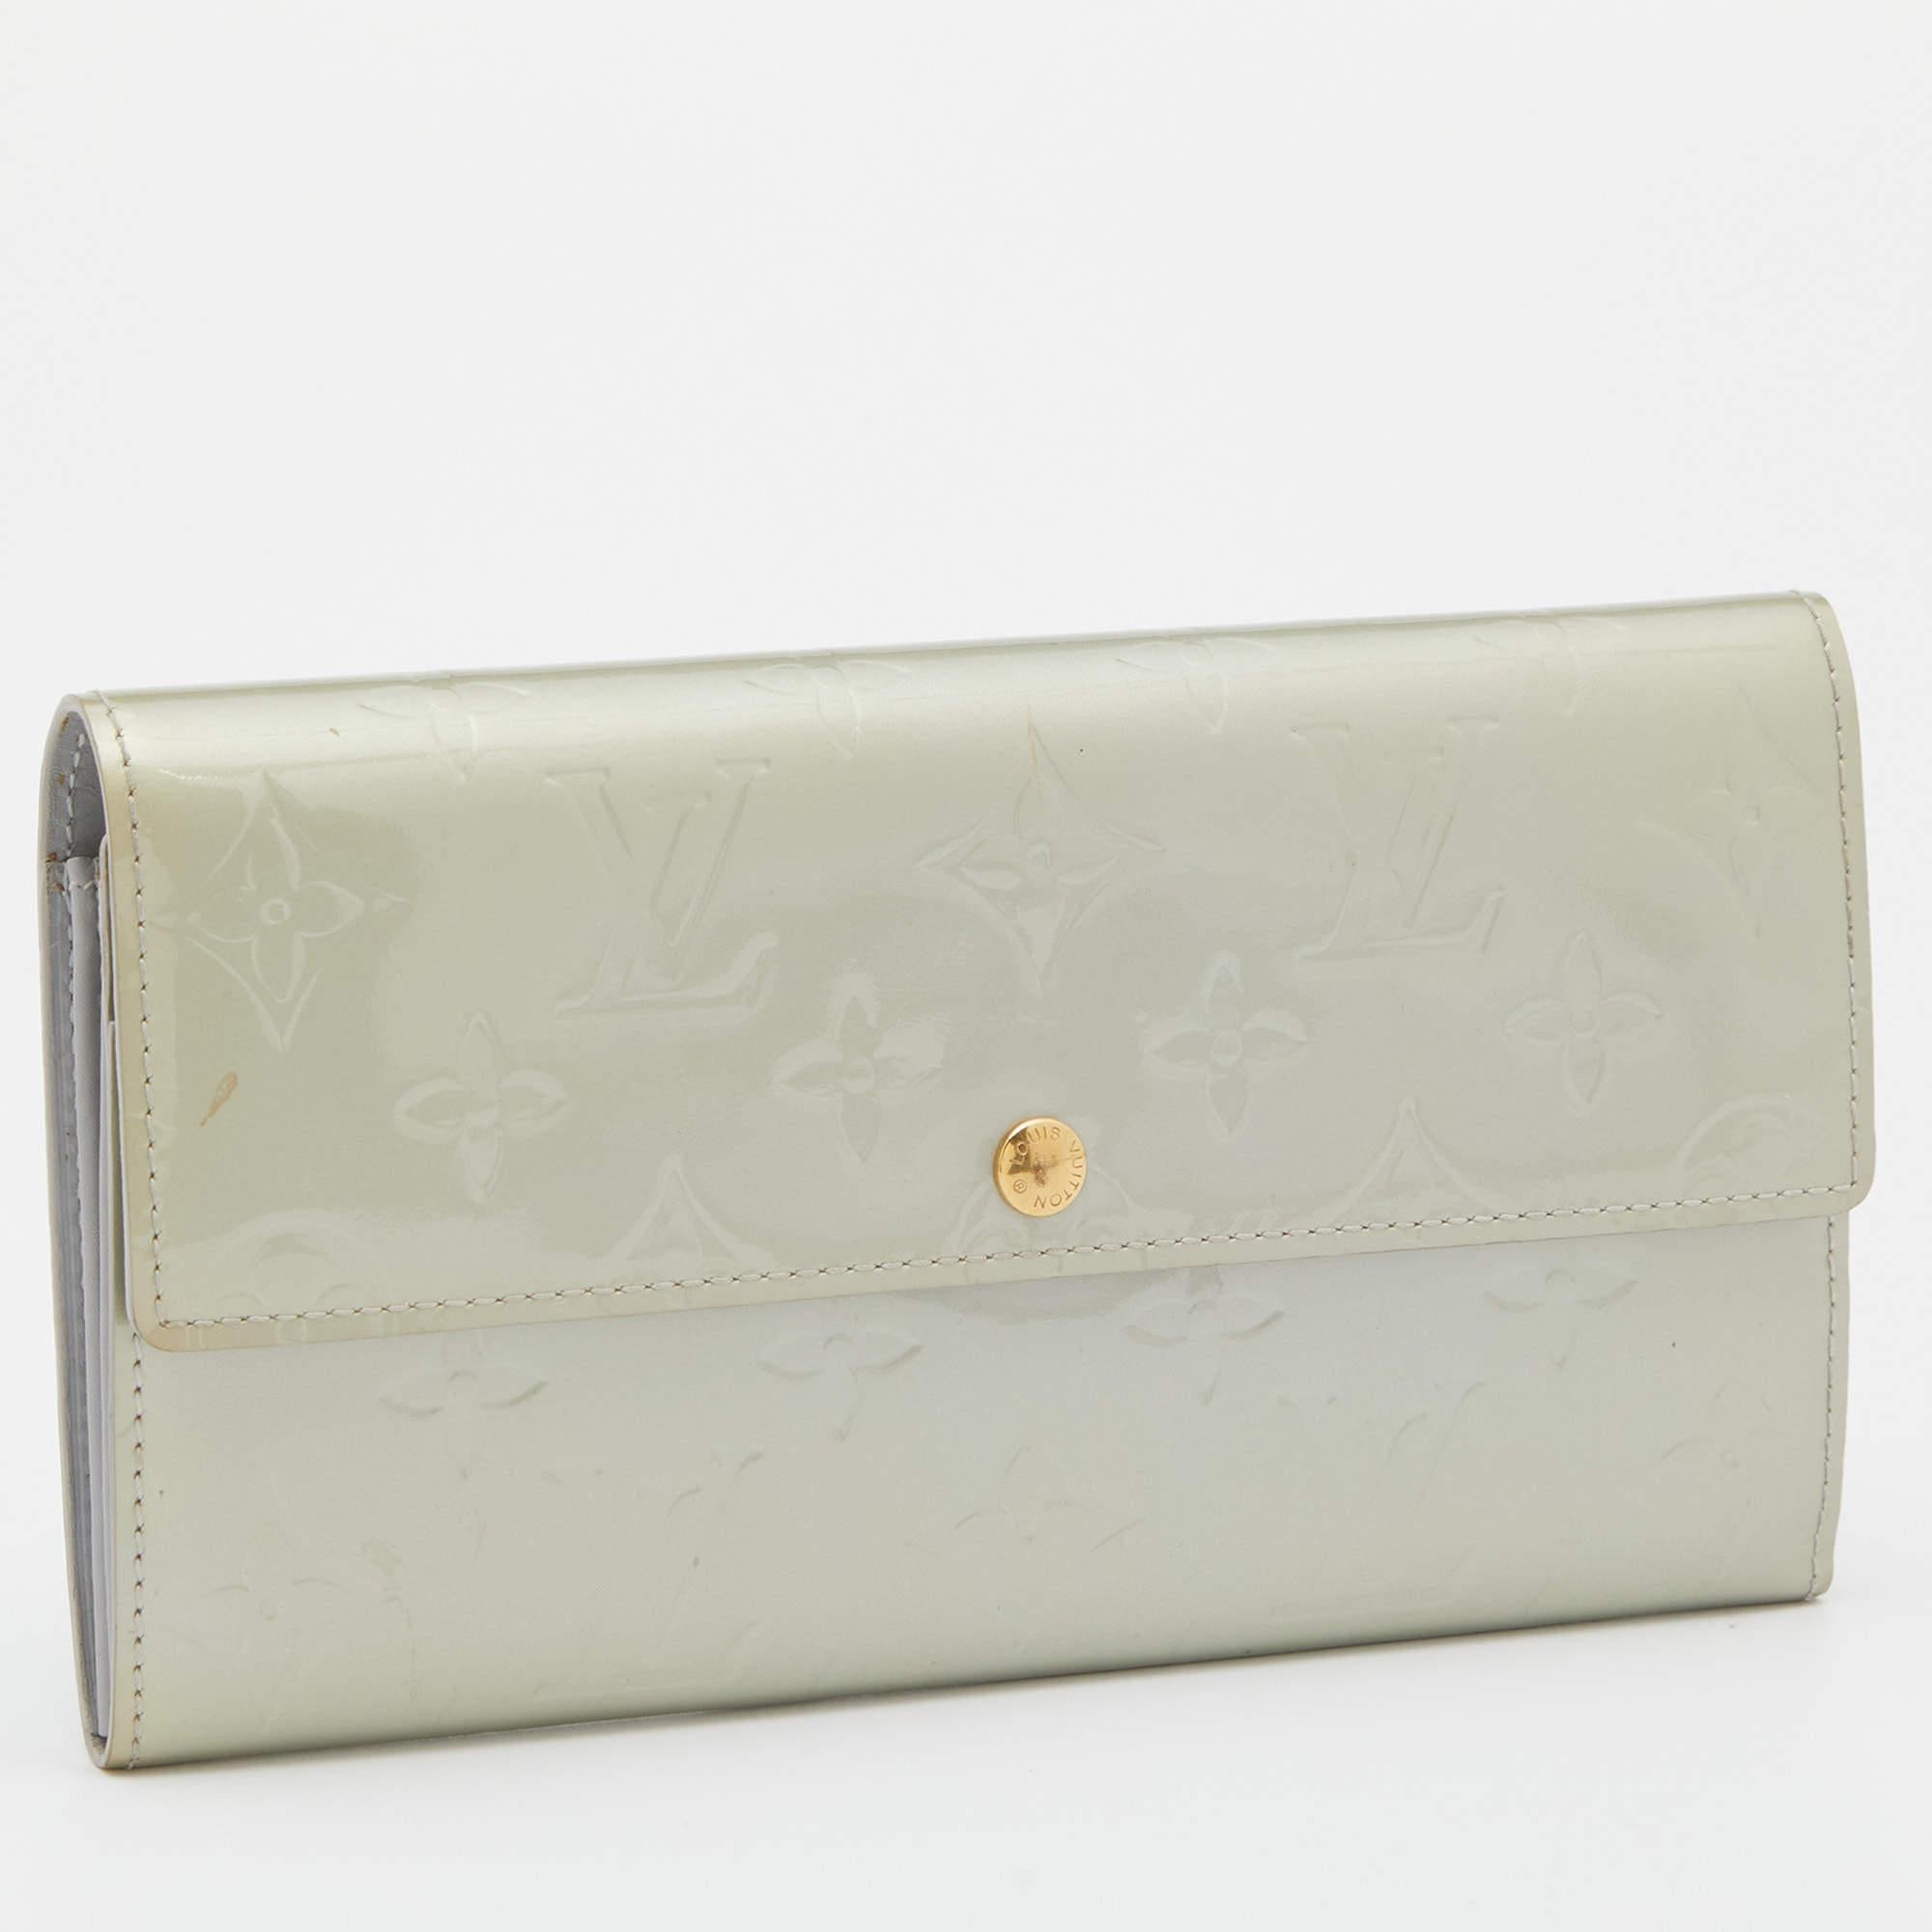 One of the most beloved and recognized accessories from the House of Louis Vuitton is this Sarah wallet. It has been created using Monogram Vernis on the exterior and flaunts a gold-toned front press stud.

